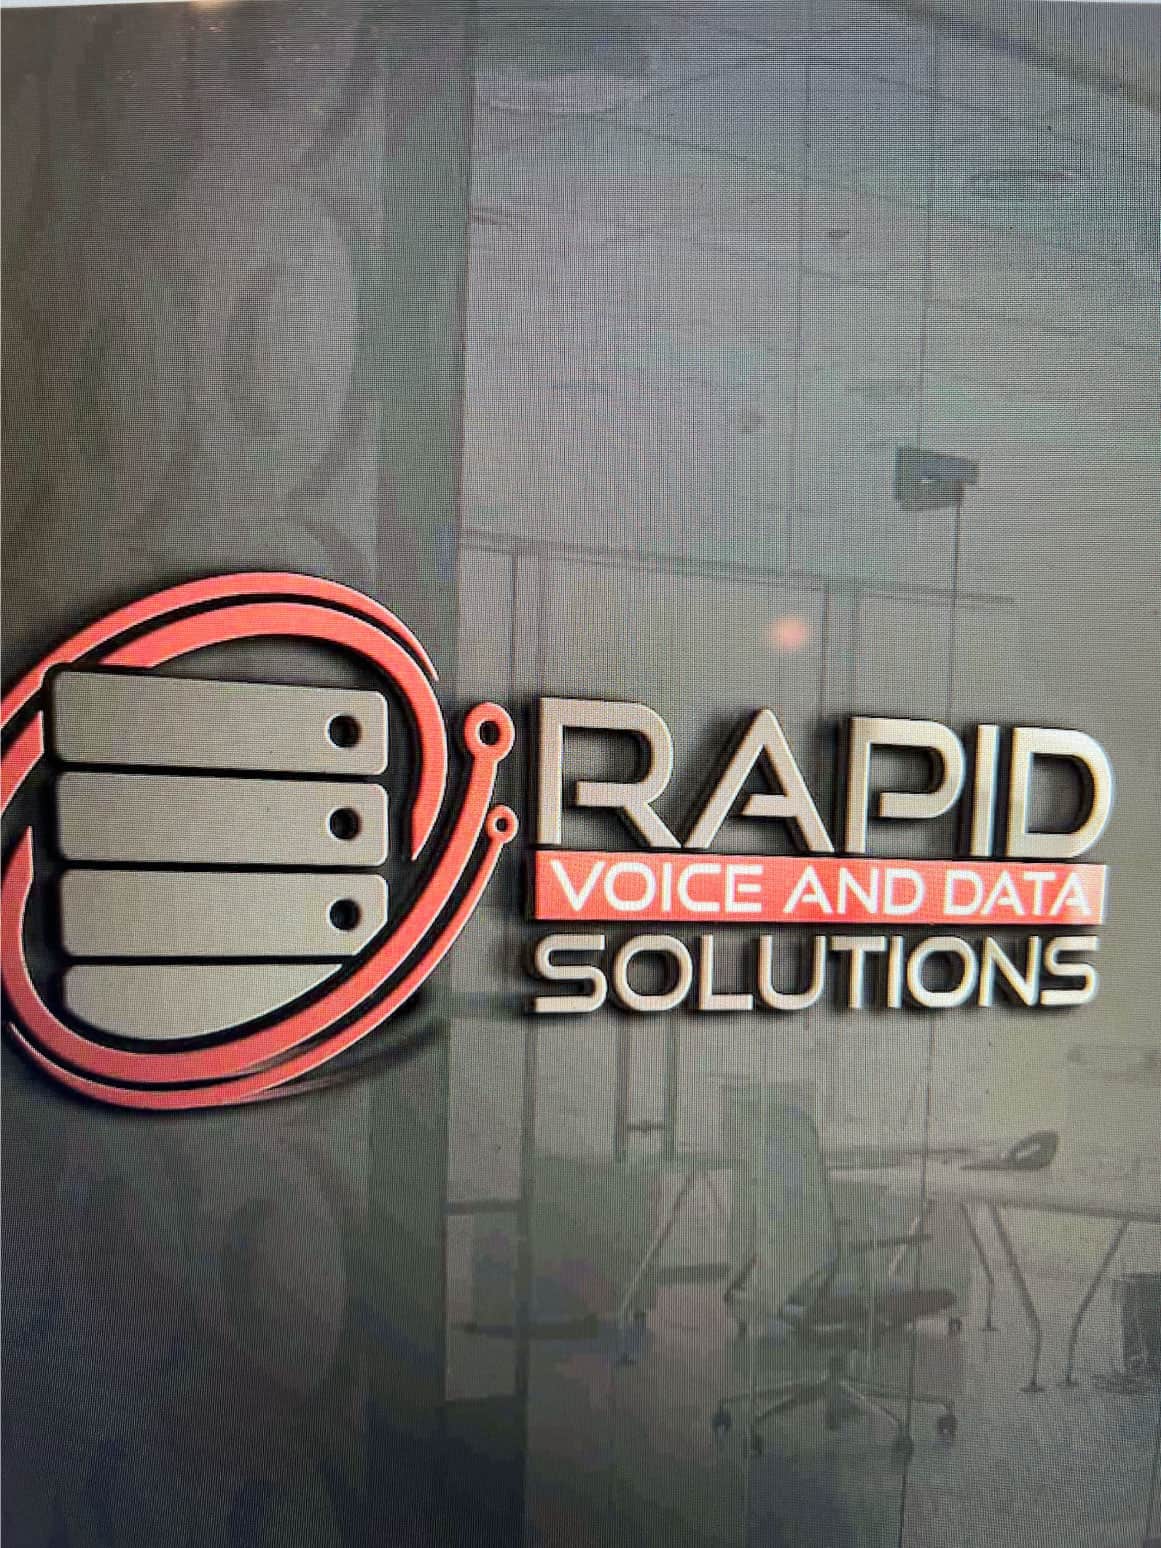 Rapid Voice and Data Solutions logo in company building.